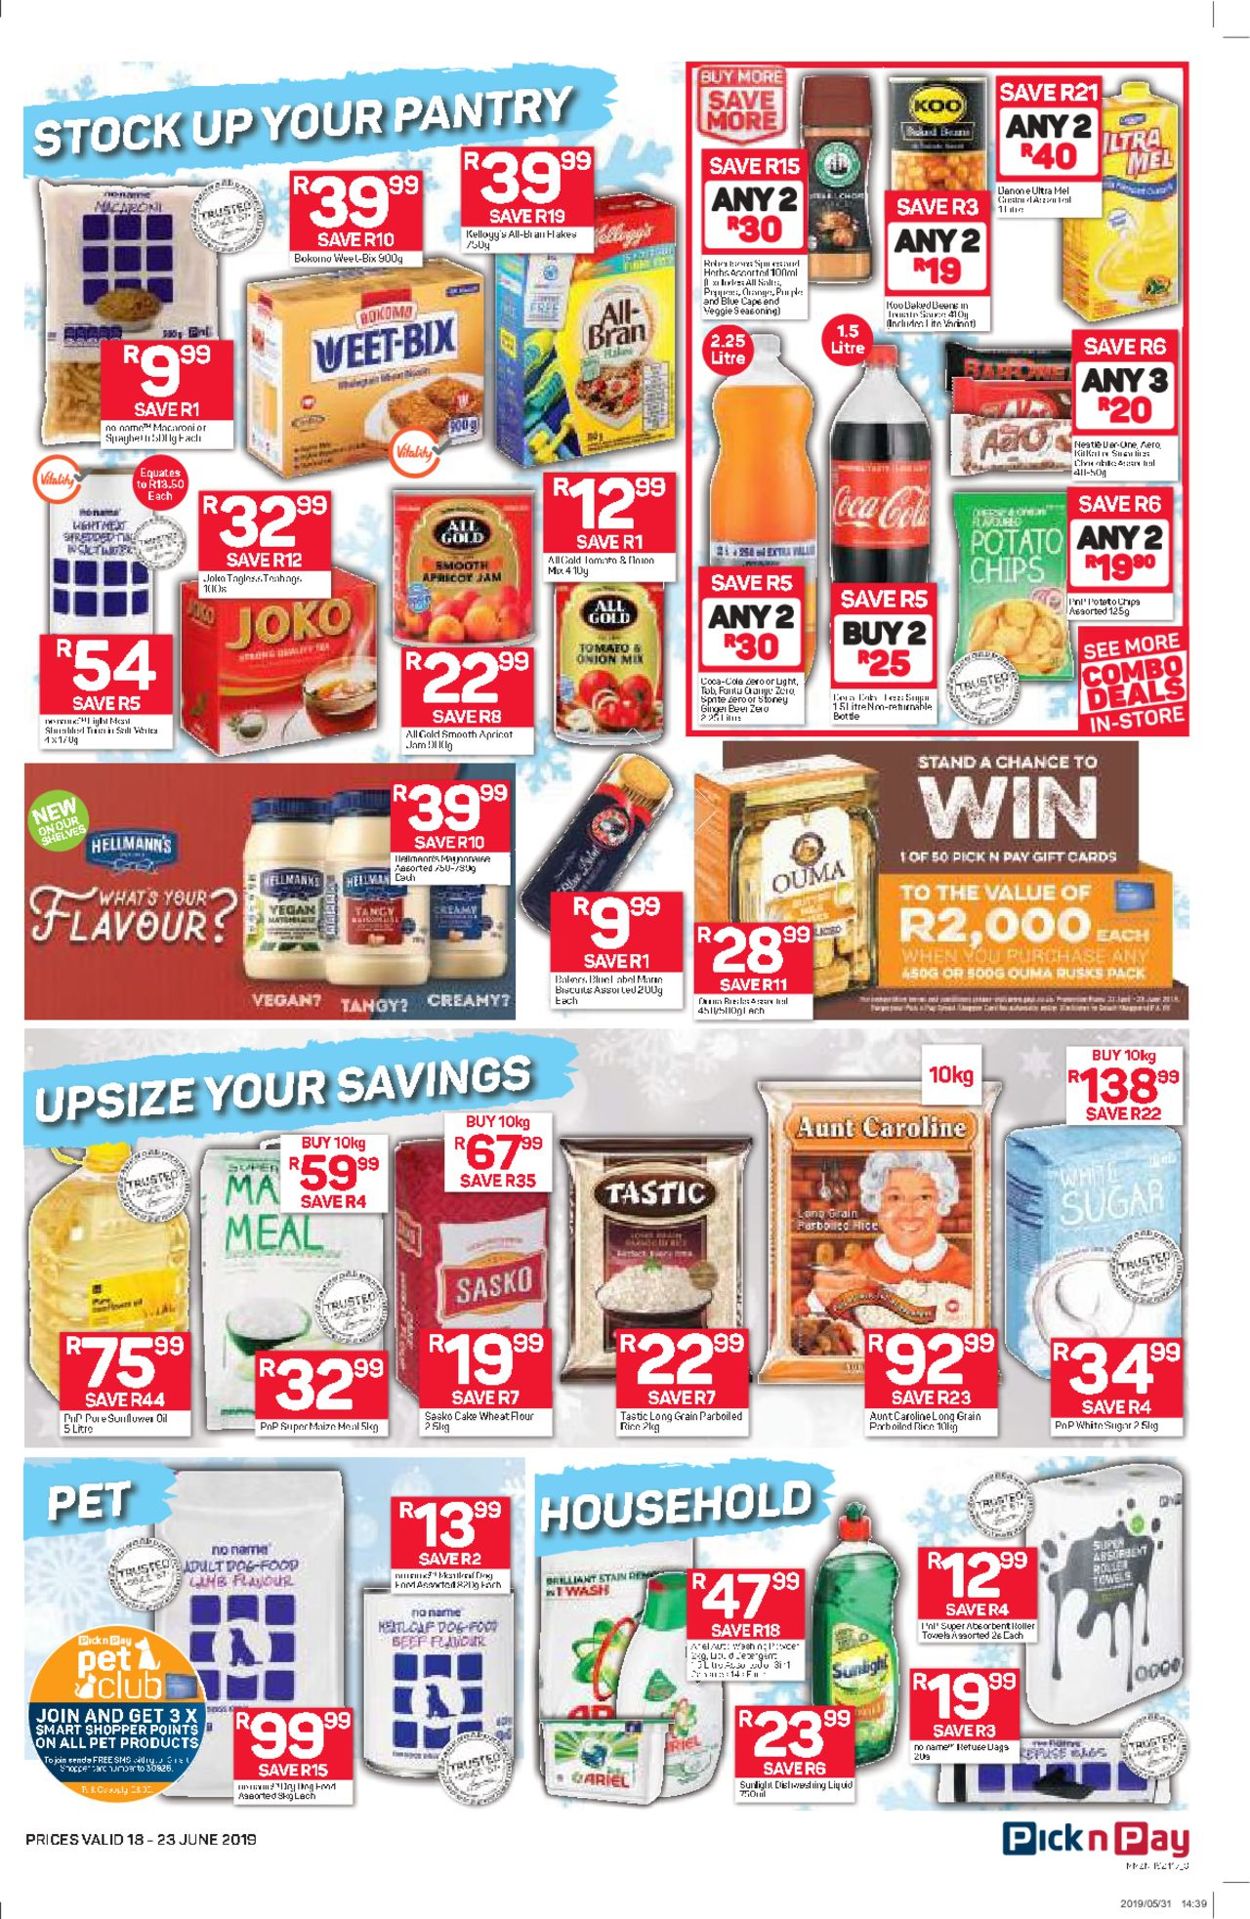 Pick n Pay Catalogue - 2019/06/18-2019/06/23 (Page 3)